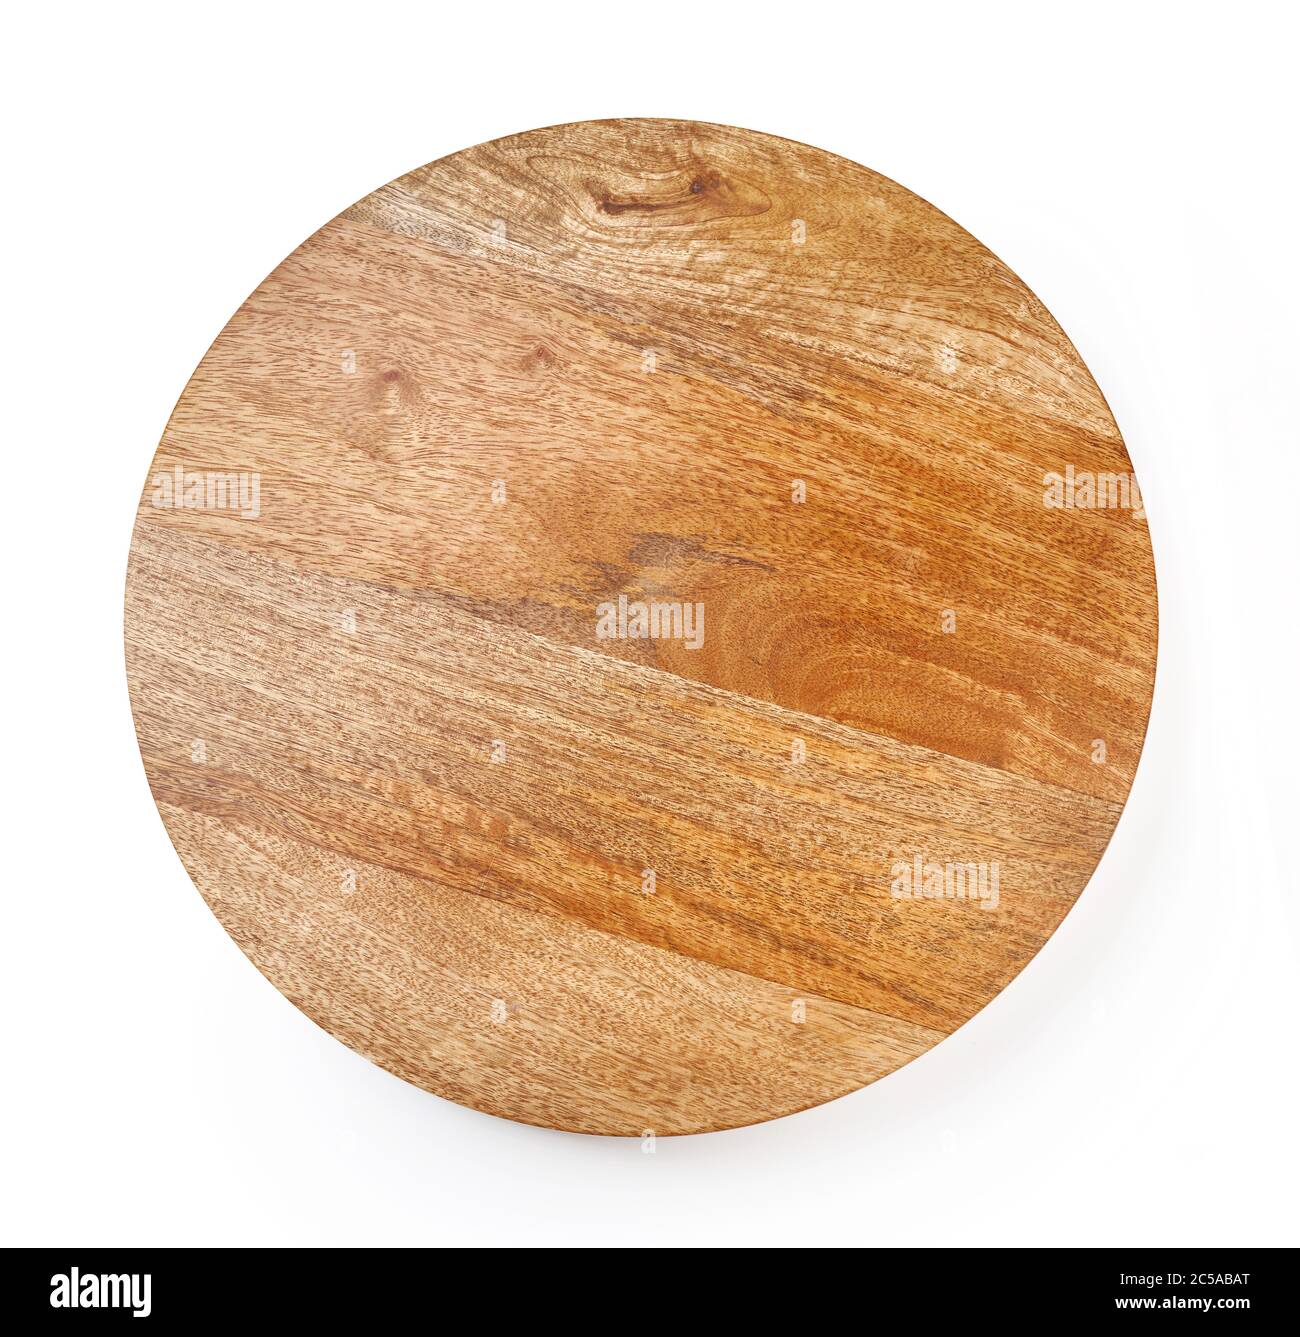 Round wooden board isolated on white background. Top view of chopping board  Stock Photo - Alamy